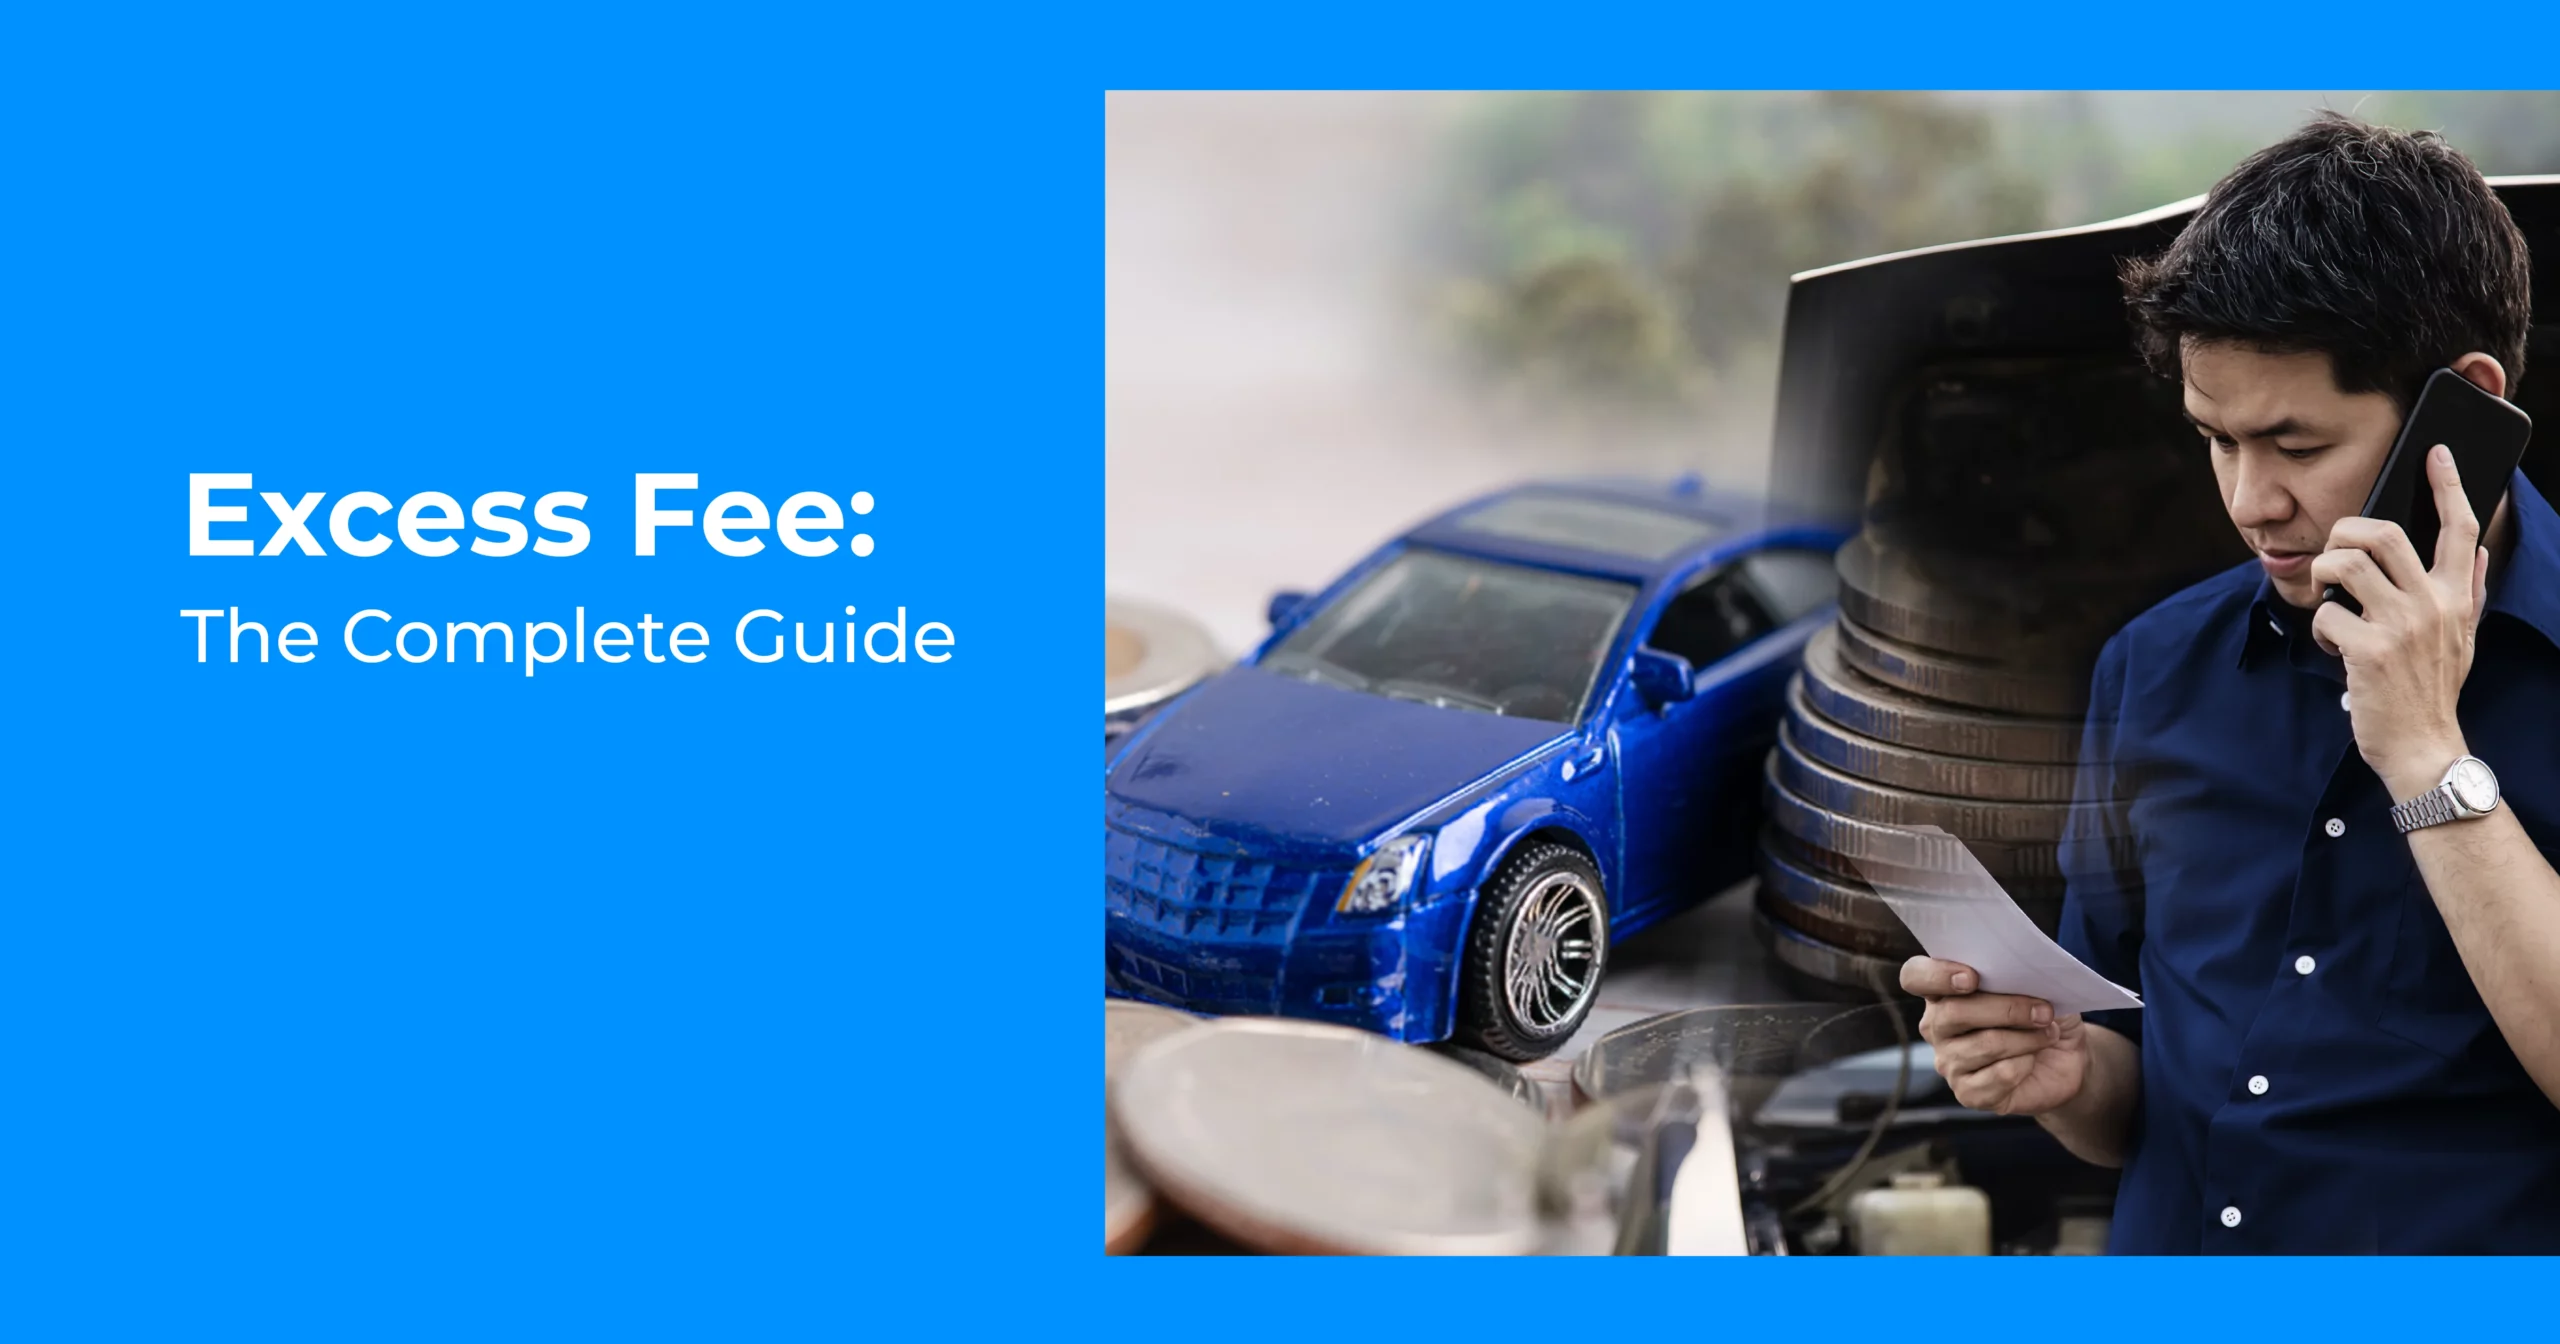 11This article talks about the complete guide for excess fee.